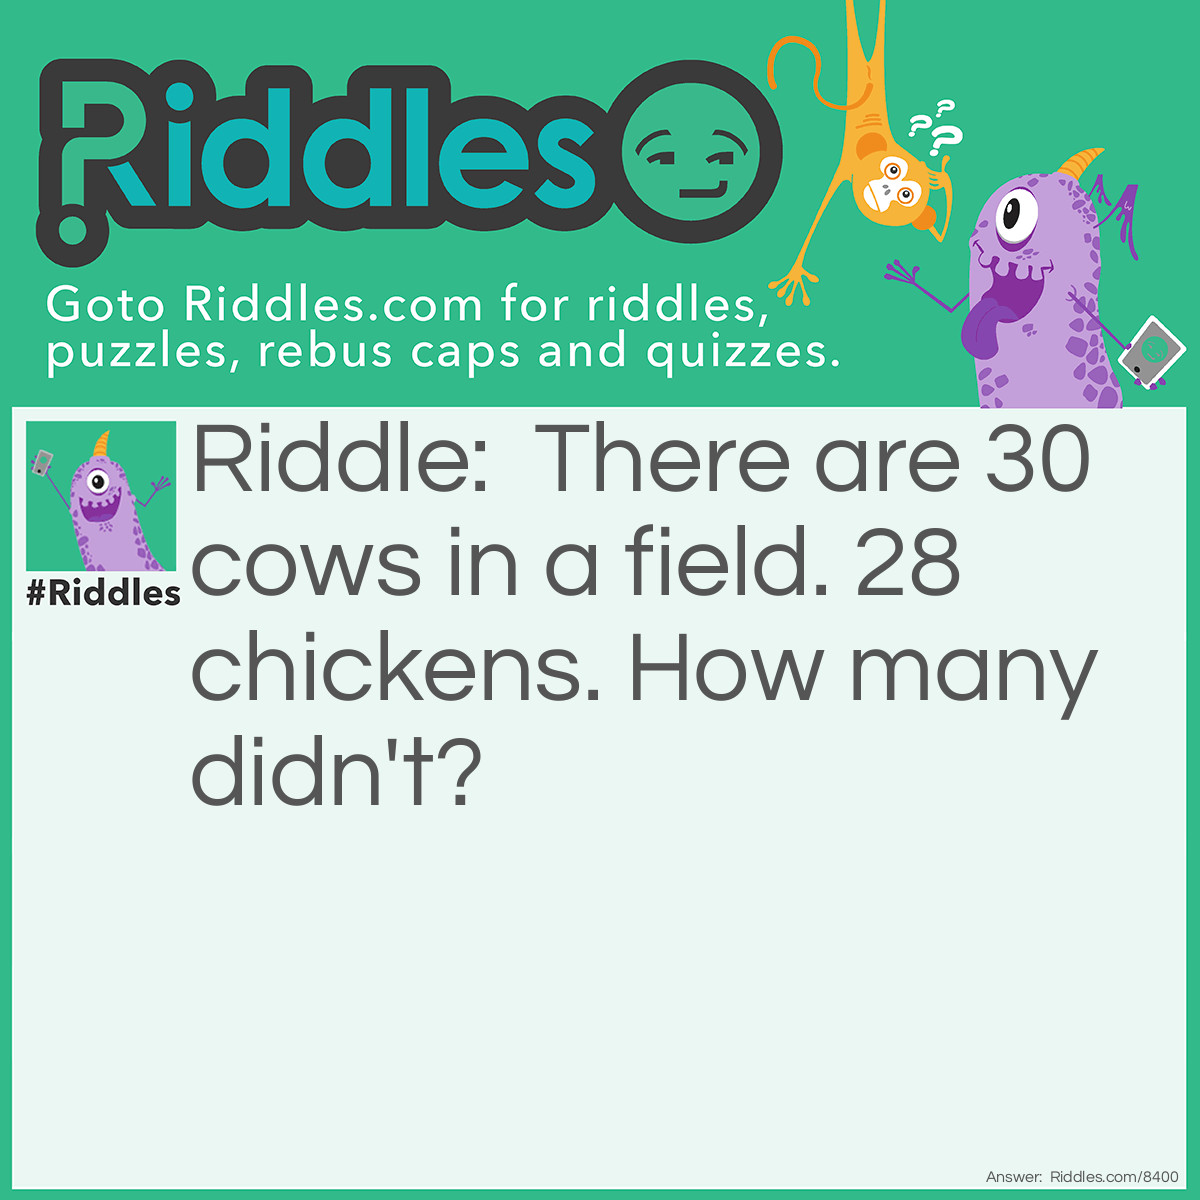 Riddle: There are 30 cows in a field. 28 chickens. How many didn't? Answer: 10! Twenty "ate" chickens